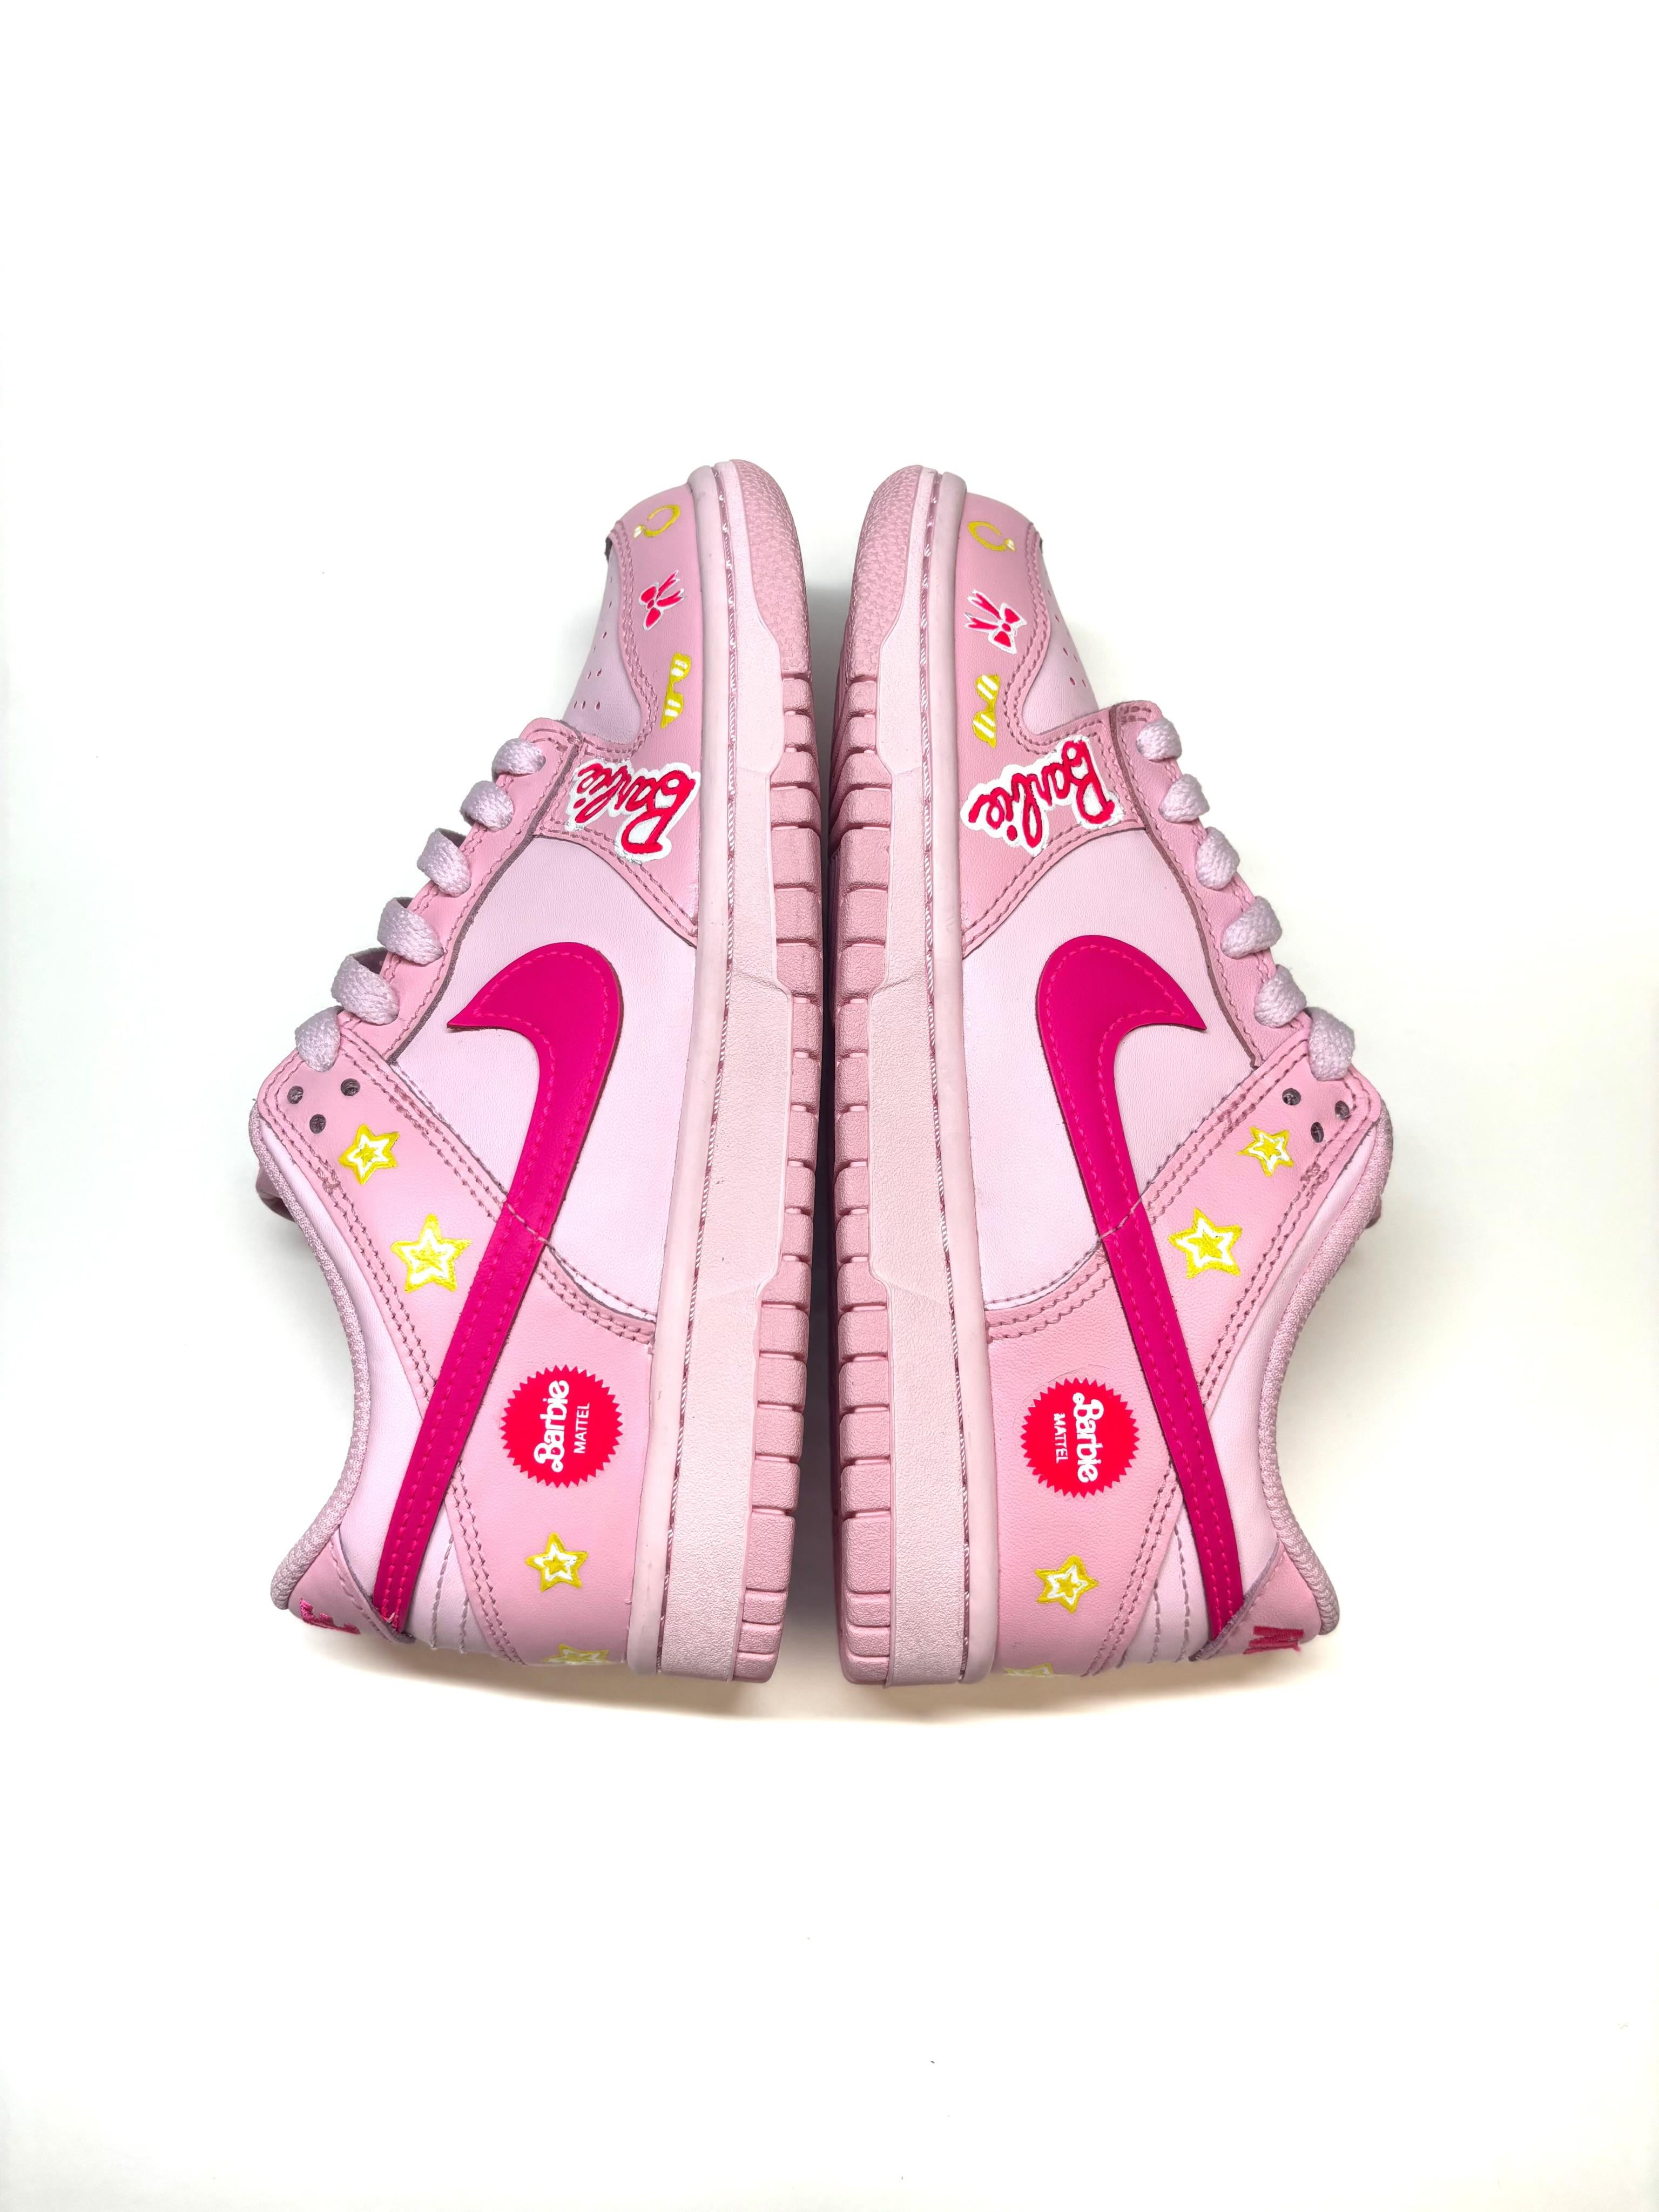 Barbie Custom Hand-Painted Nike Dunk Concept Sneakers by Reed Revesz In New Condition For Sale In Miami Beach, FL